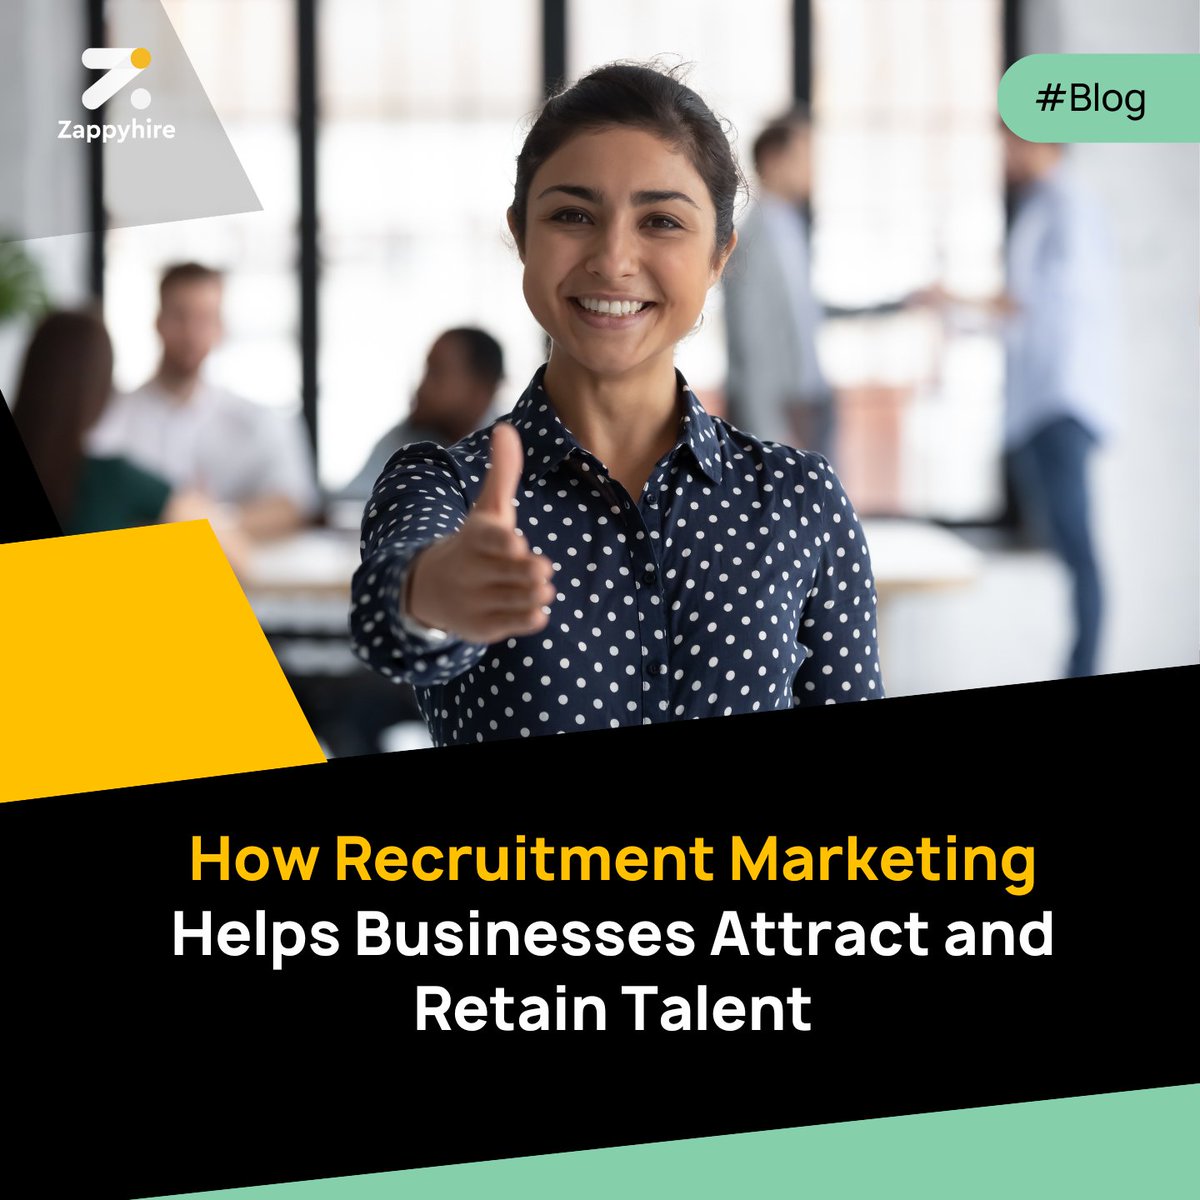 What exactly makes recruitment marketing so essential?
If you’re interested in a deeper dive into how recruitment marketing can help you attract and retain top talent, check out this blog post! 
bit.ly/3QBbwSA

#RecruitmentMarketing #HRtech #EmployerBranding